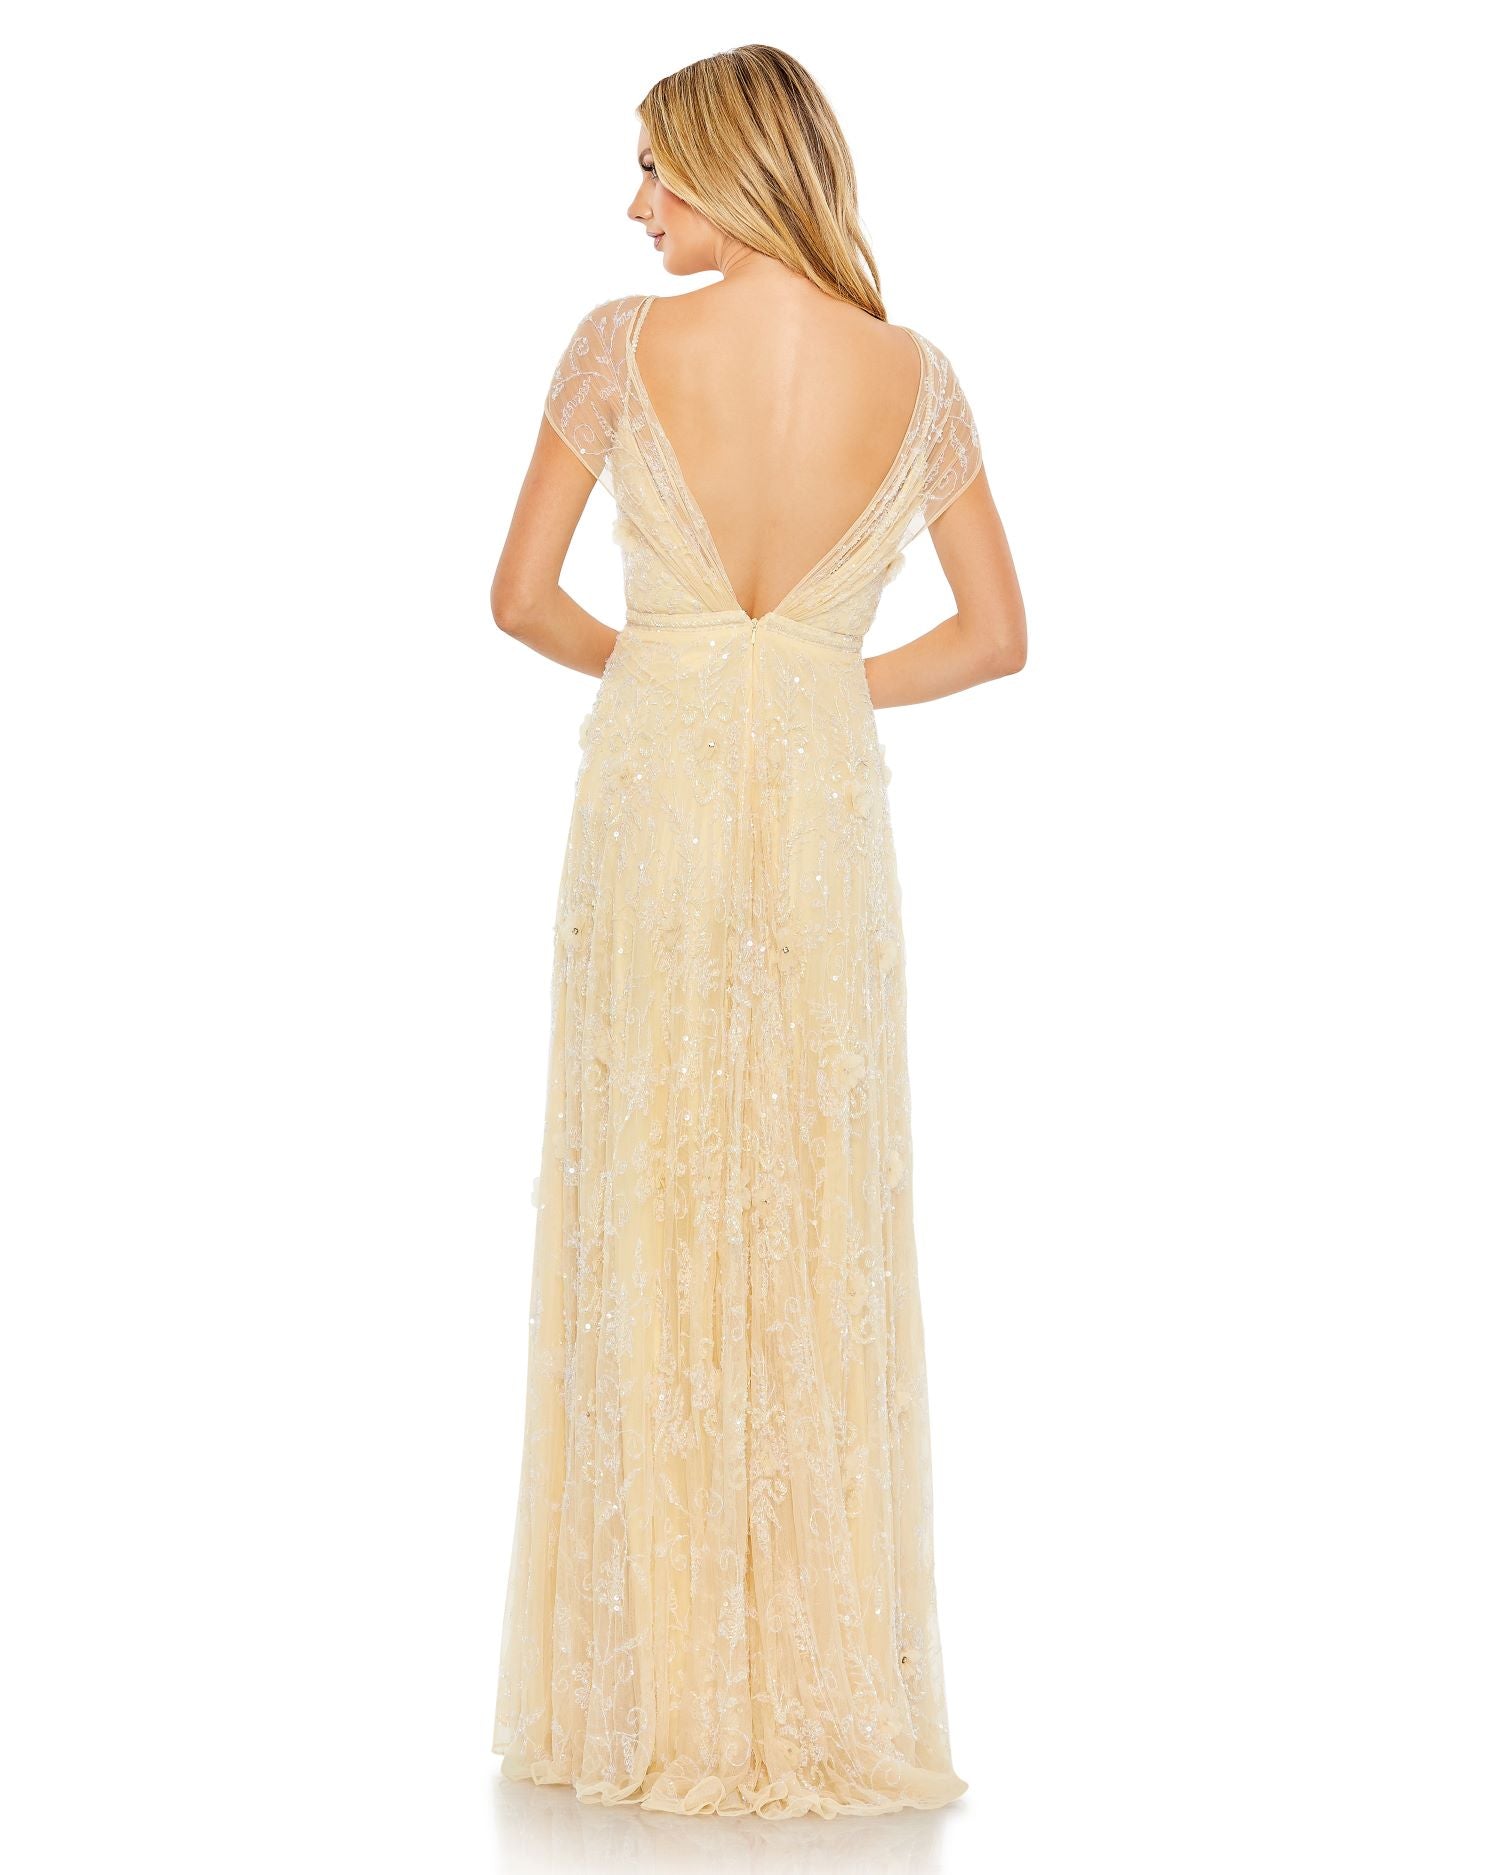 Embellished Illusion Cap Sleeve Gown